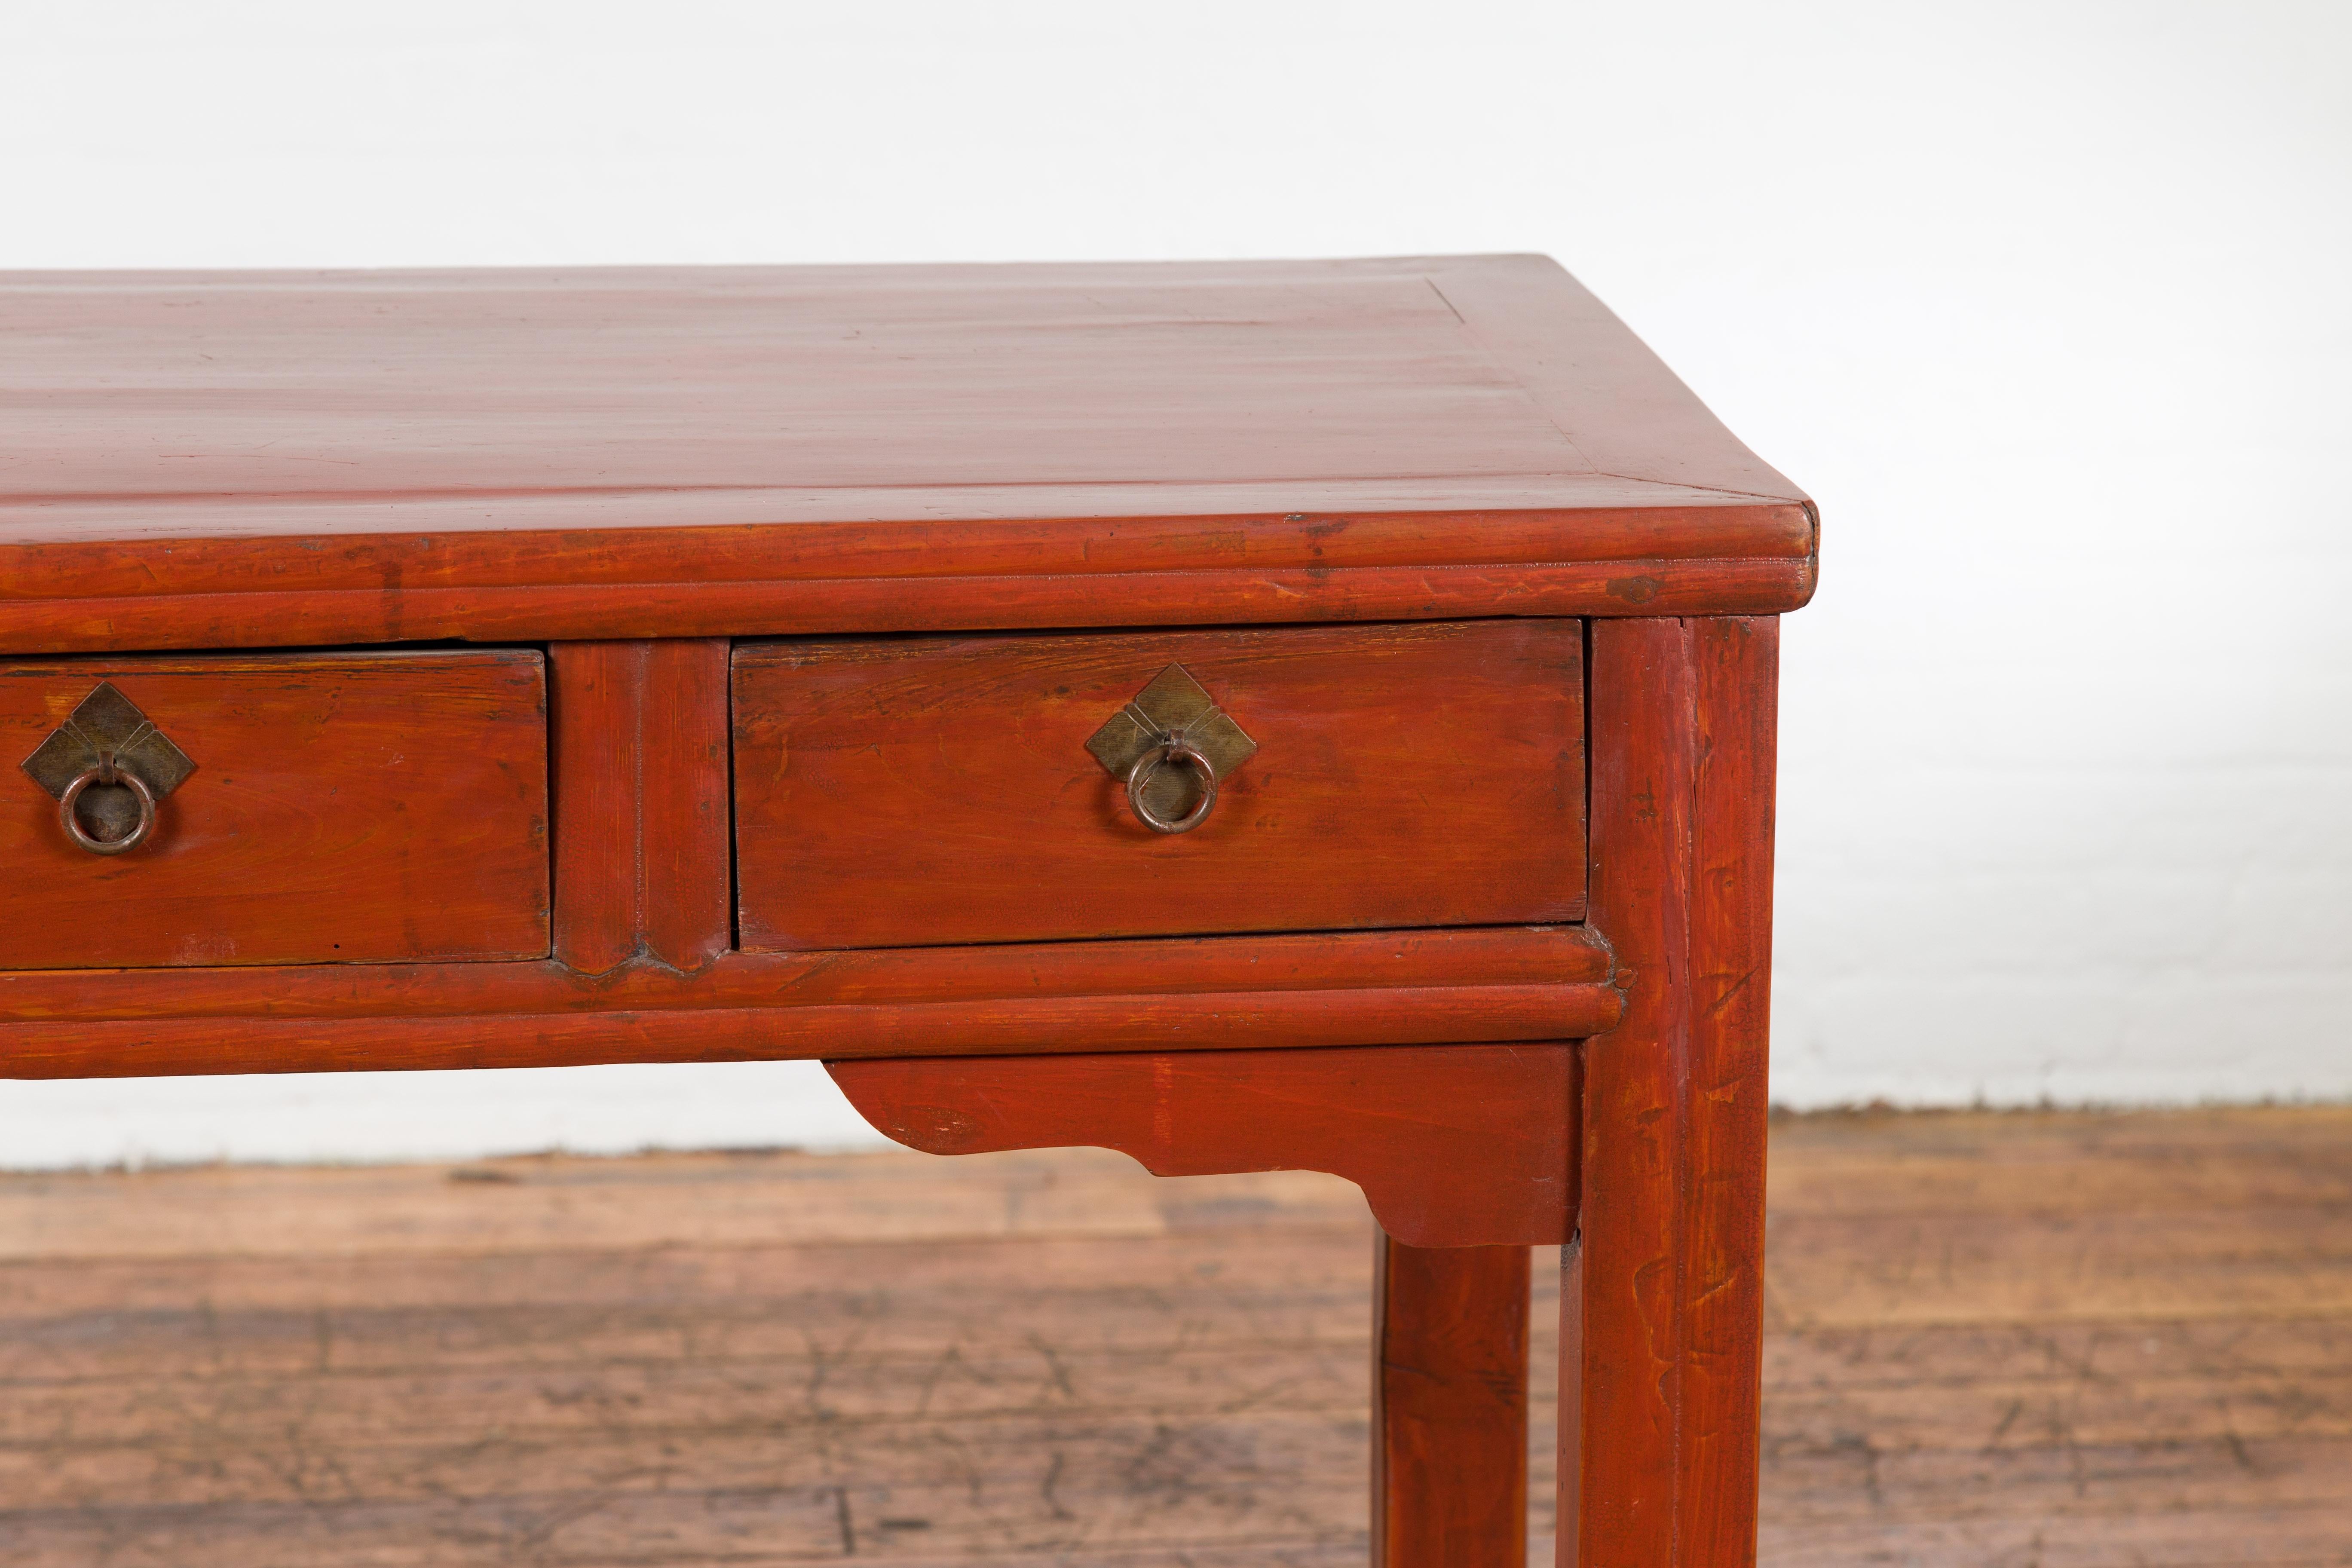 Chinese Qing Dynasty 19th Century Red Orange Lacquered Table with Three Drawers For Sale 2